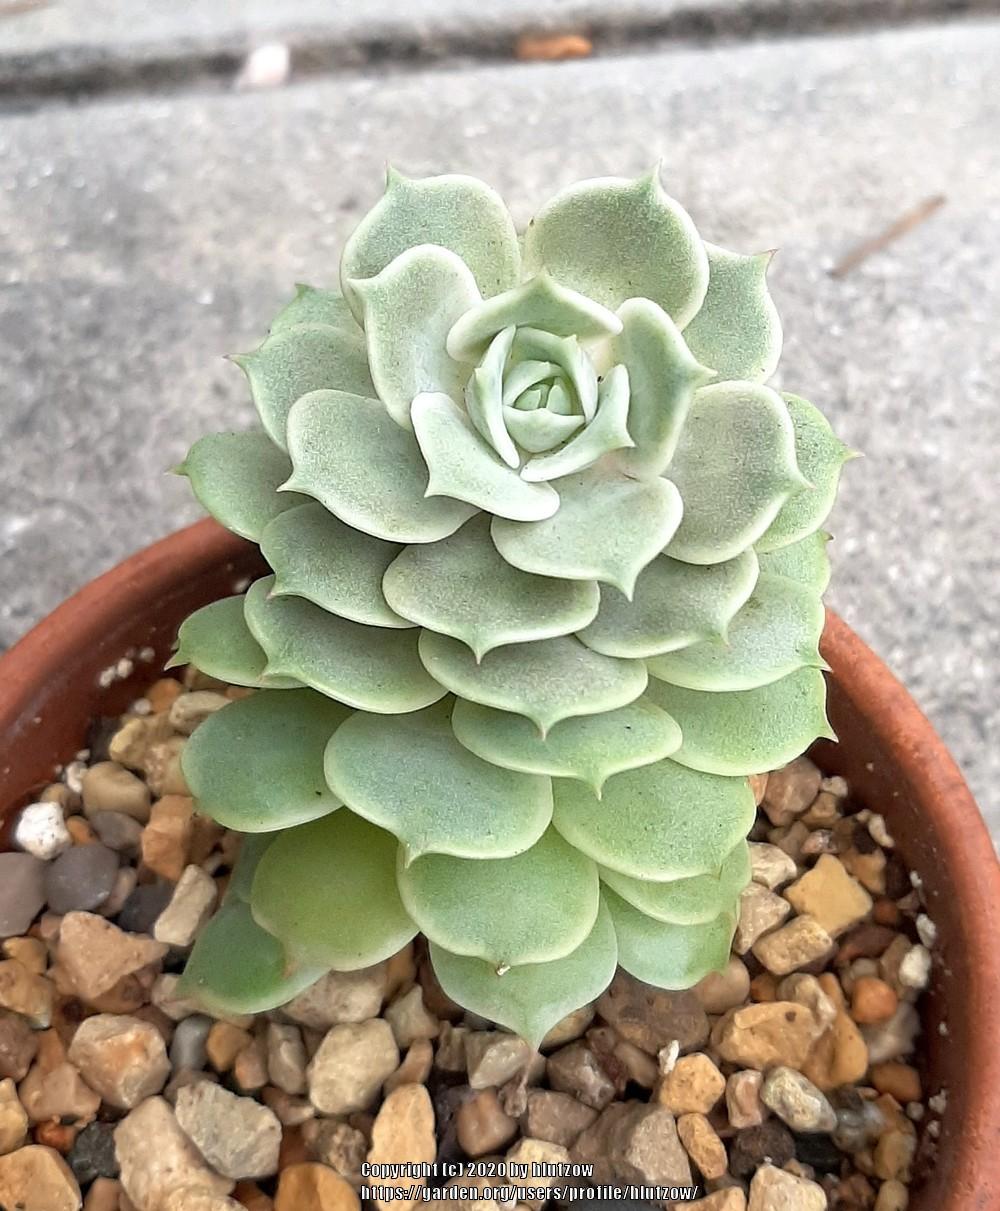 Photo of Echeveria 'Lola' uploaded by hlutzow